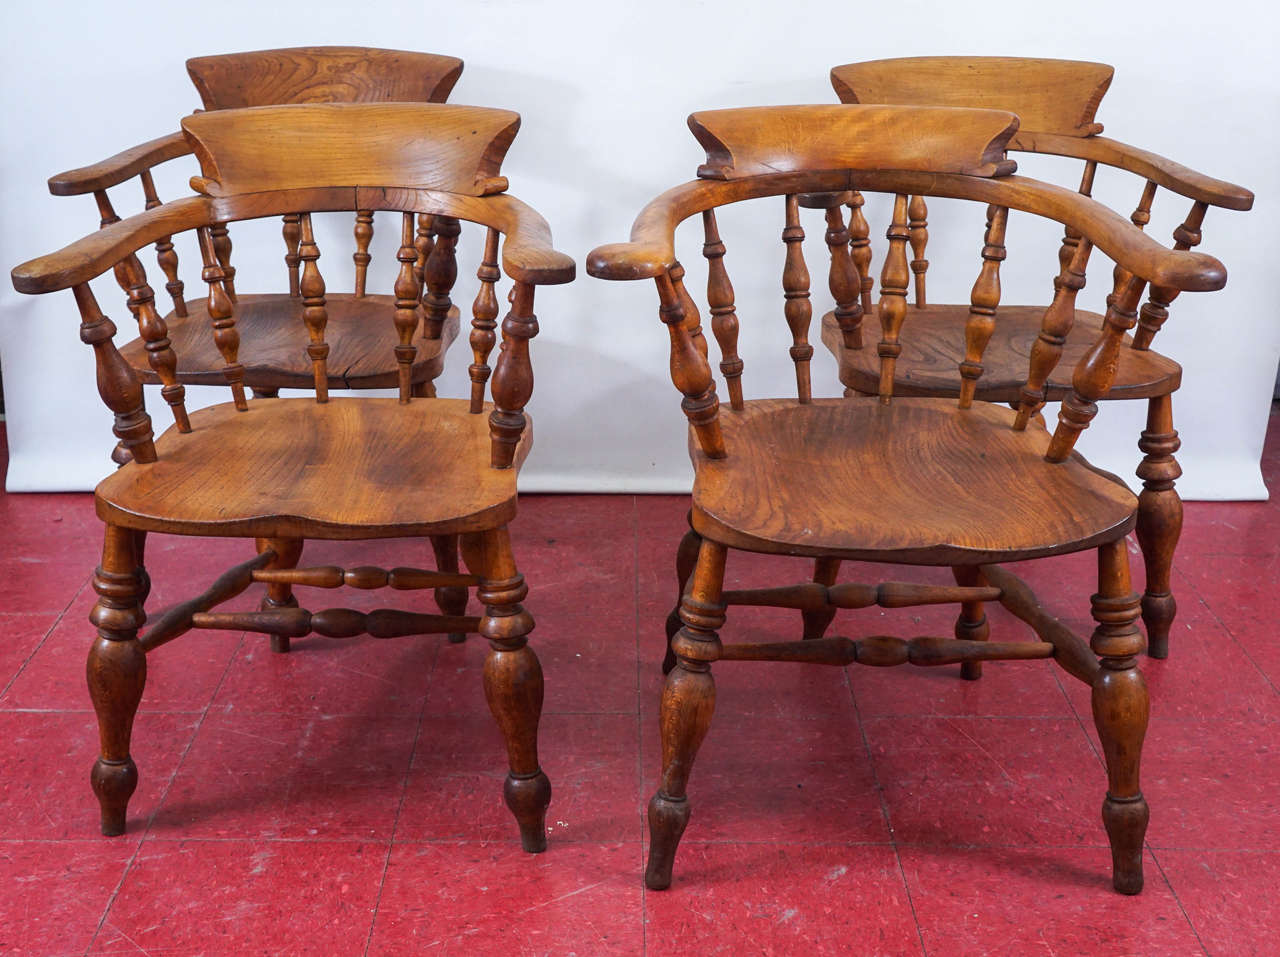 These chairs have boldly turned legs and spindles, hand-carved seats and back panels with an elegant sweep combined with solidly built oak construction including double stretchers. All chair dimensions vary slightly due to hand craftsmanship, circa